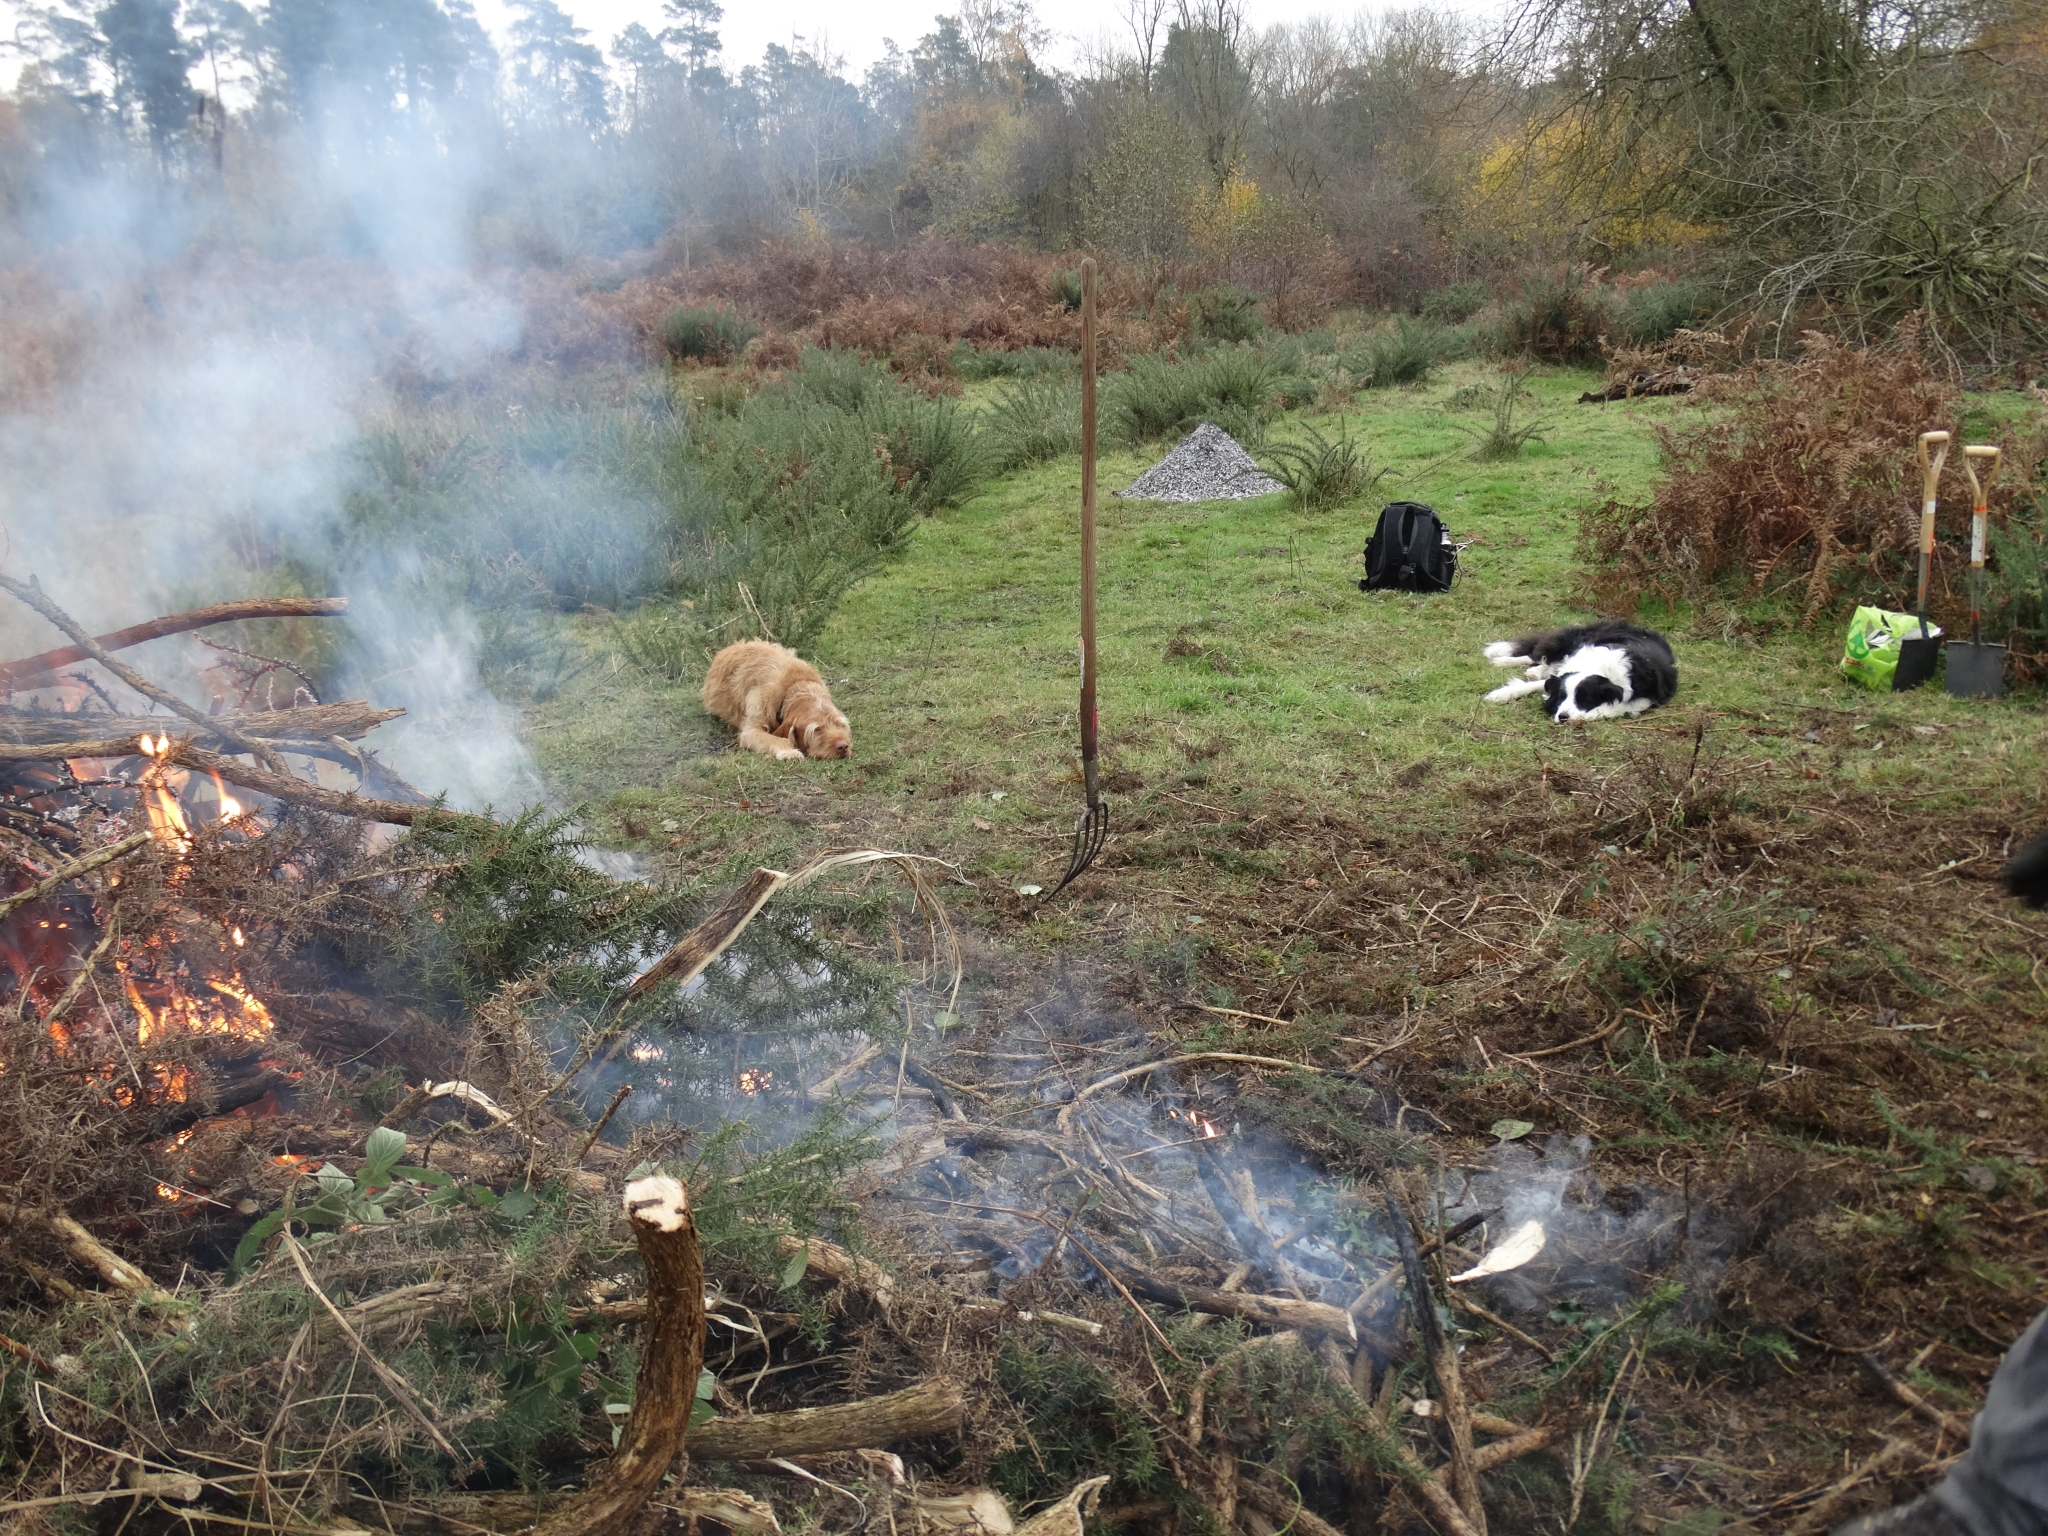 A photo from the FoTF Conservation Event - November 2019 - Gorse Clearance at Hockham Hills & Holes : 2 Fire officer dogs watch over the fire